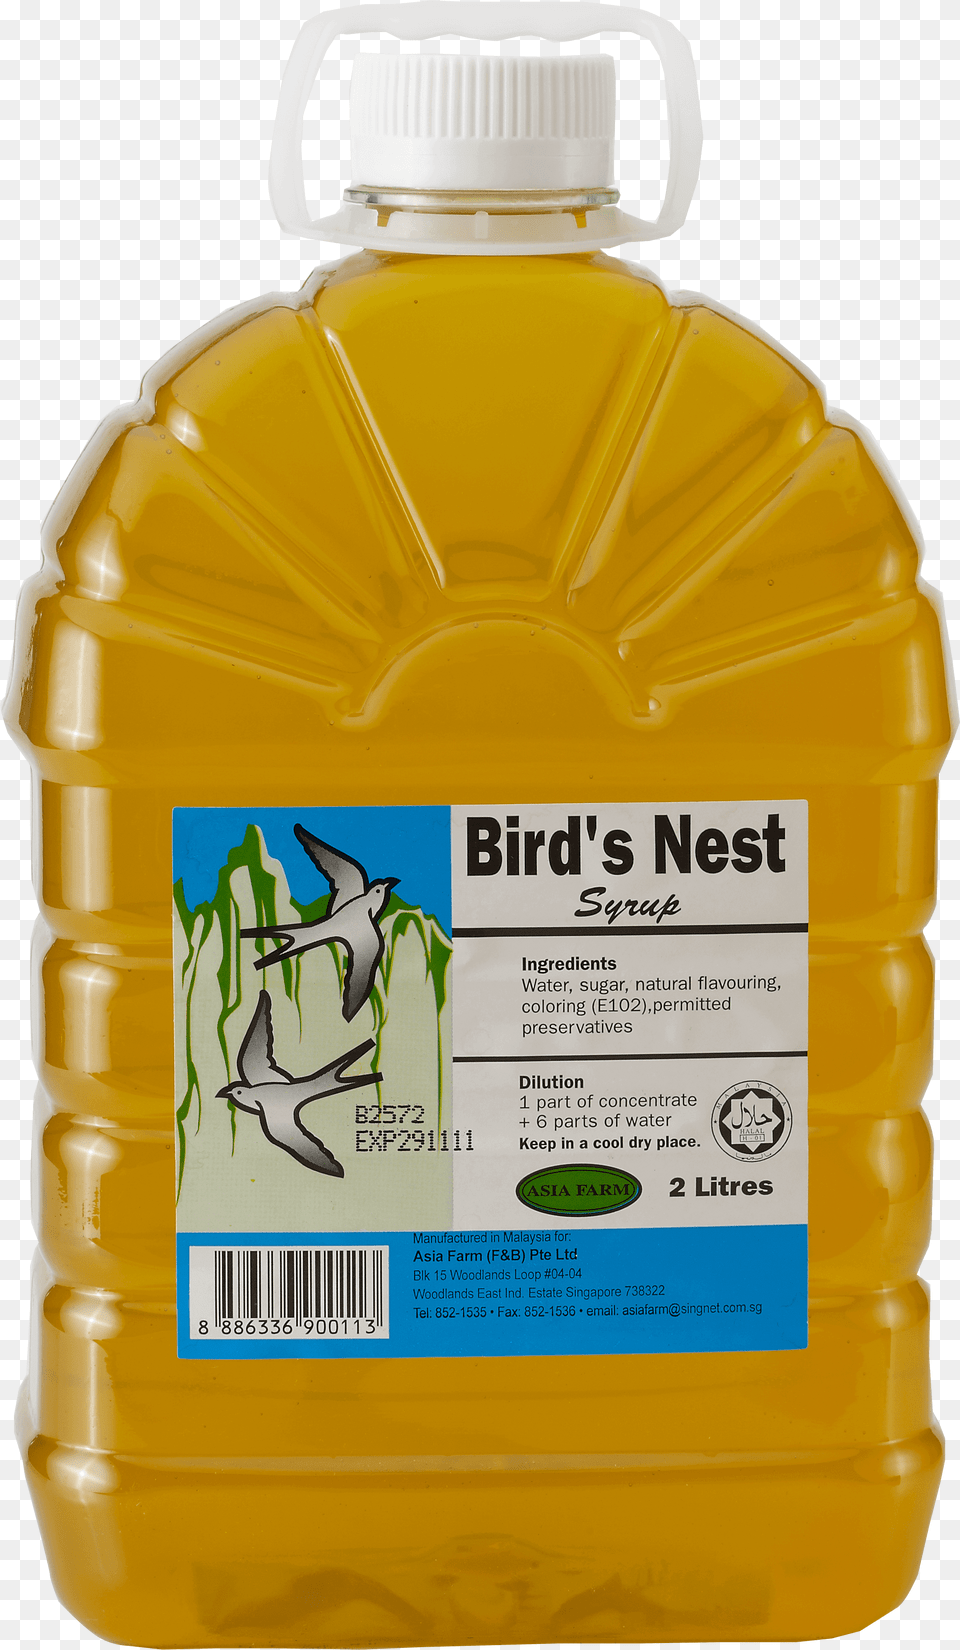 Download Birdu0027s Nest Syrup Bird Nest Image With No Bottle, Cooking Oil, Food Png